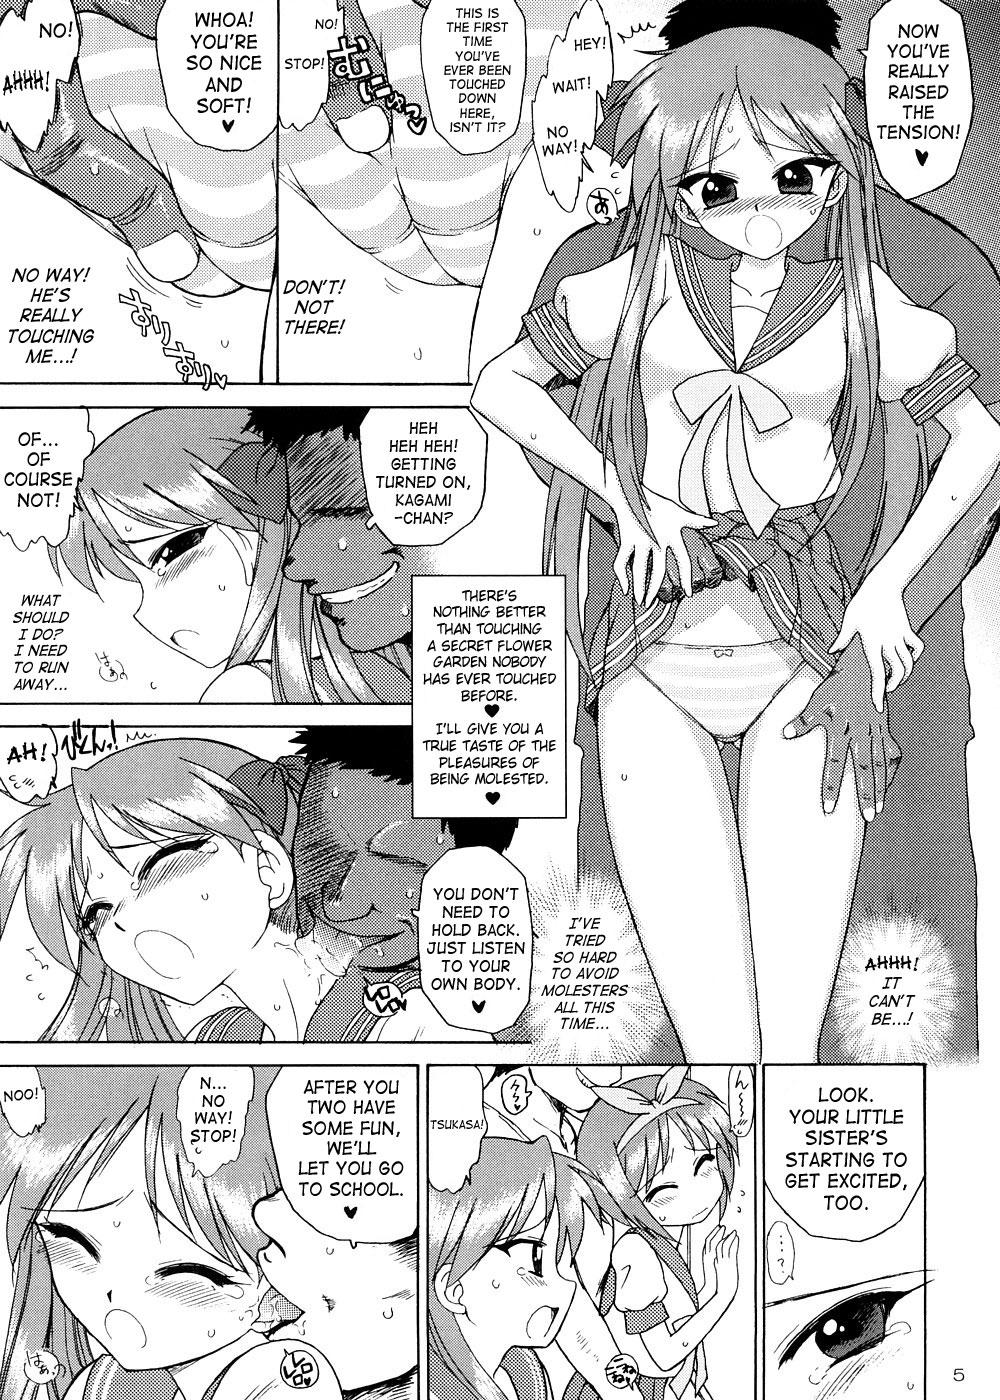 Best Blowjobs Man in the Mirror - Lucky star Fisting - Page 4